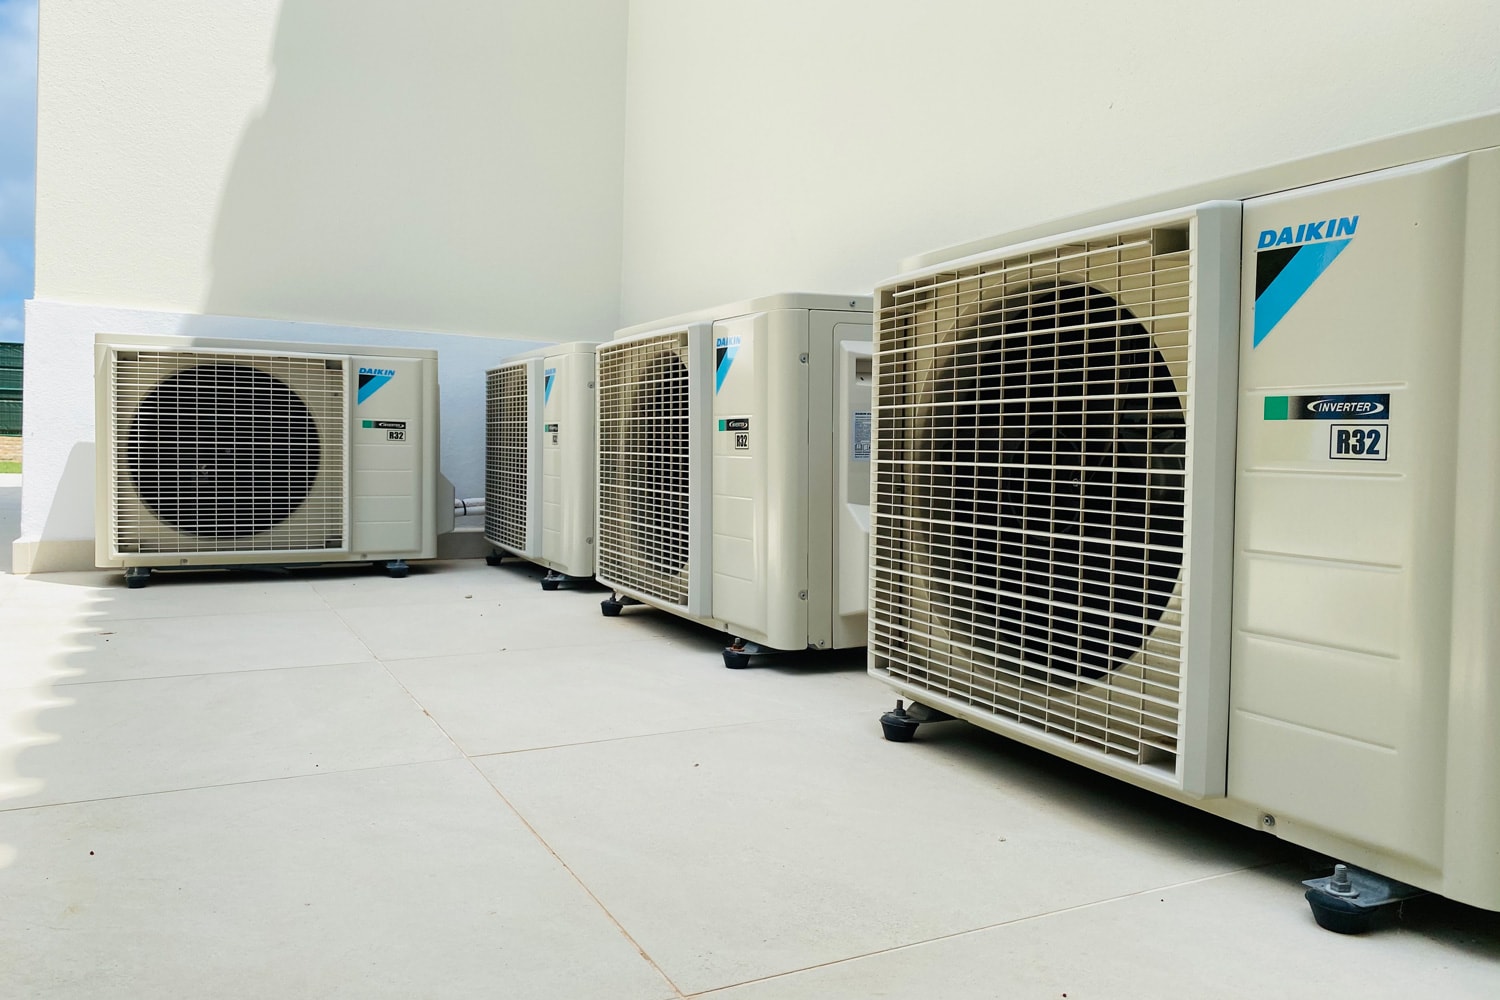 Four Daikin air conditioning units on a stone patio outside a residential home